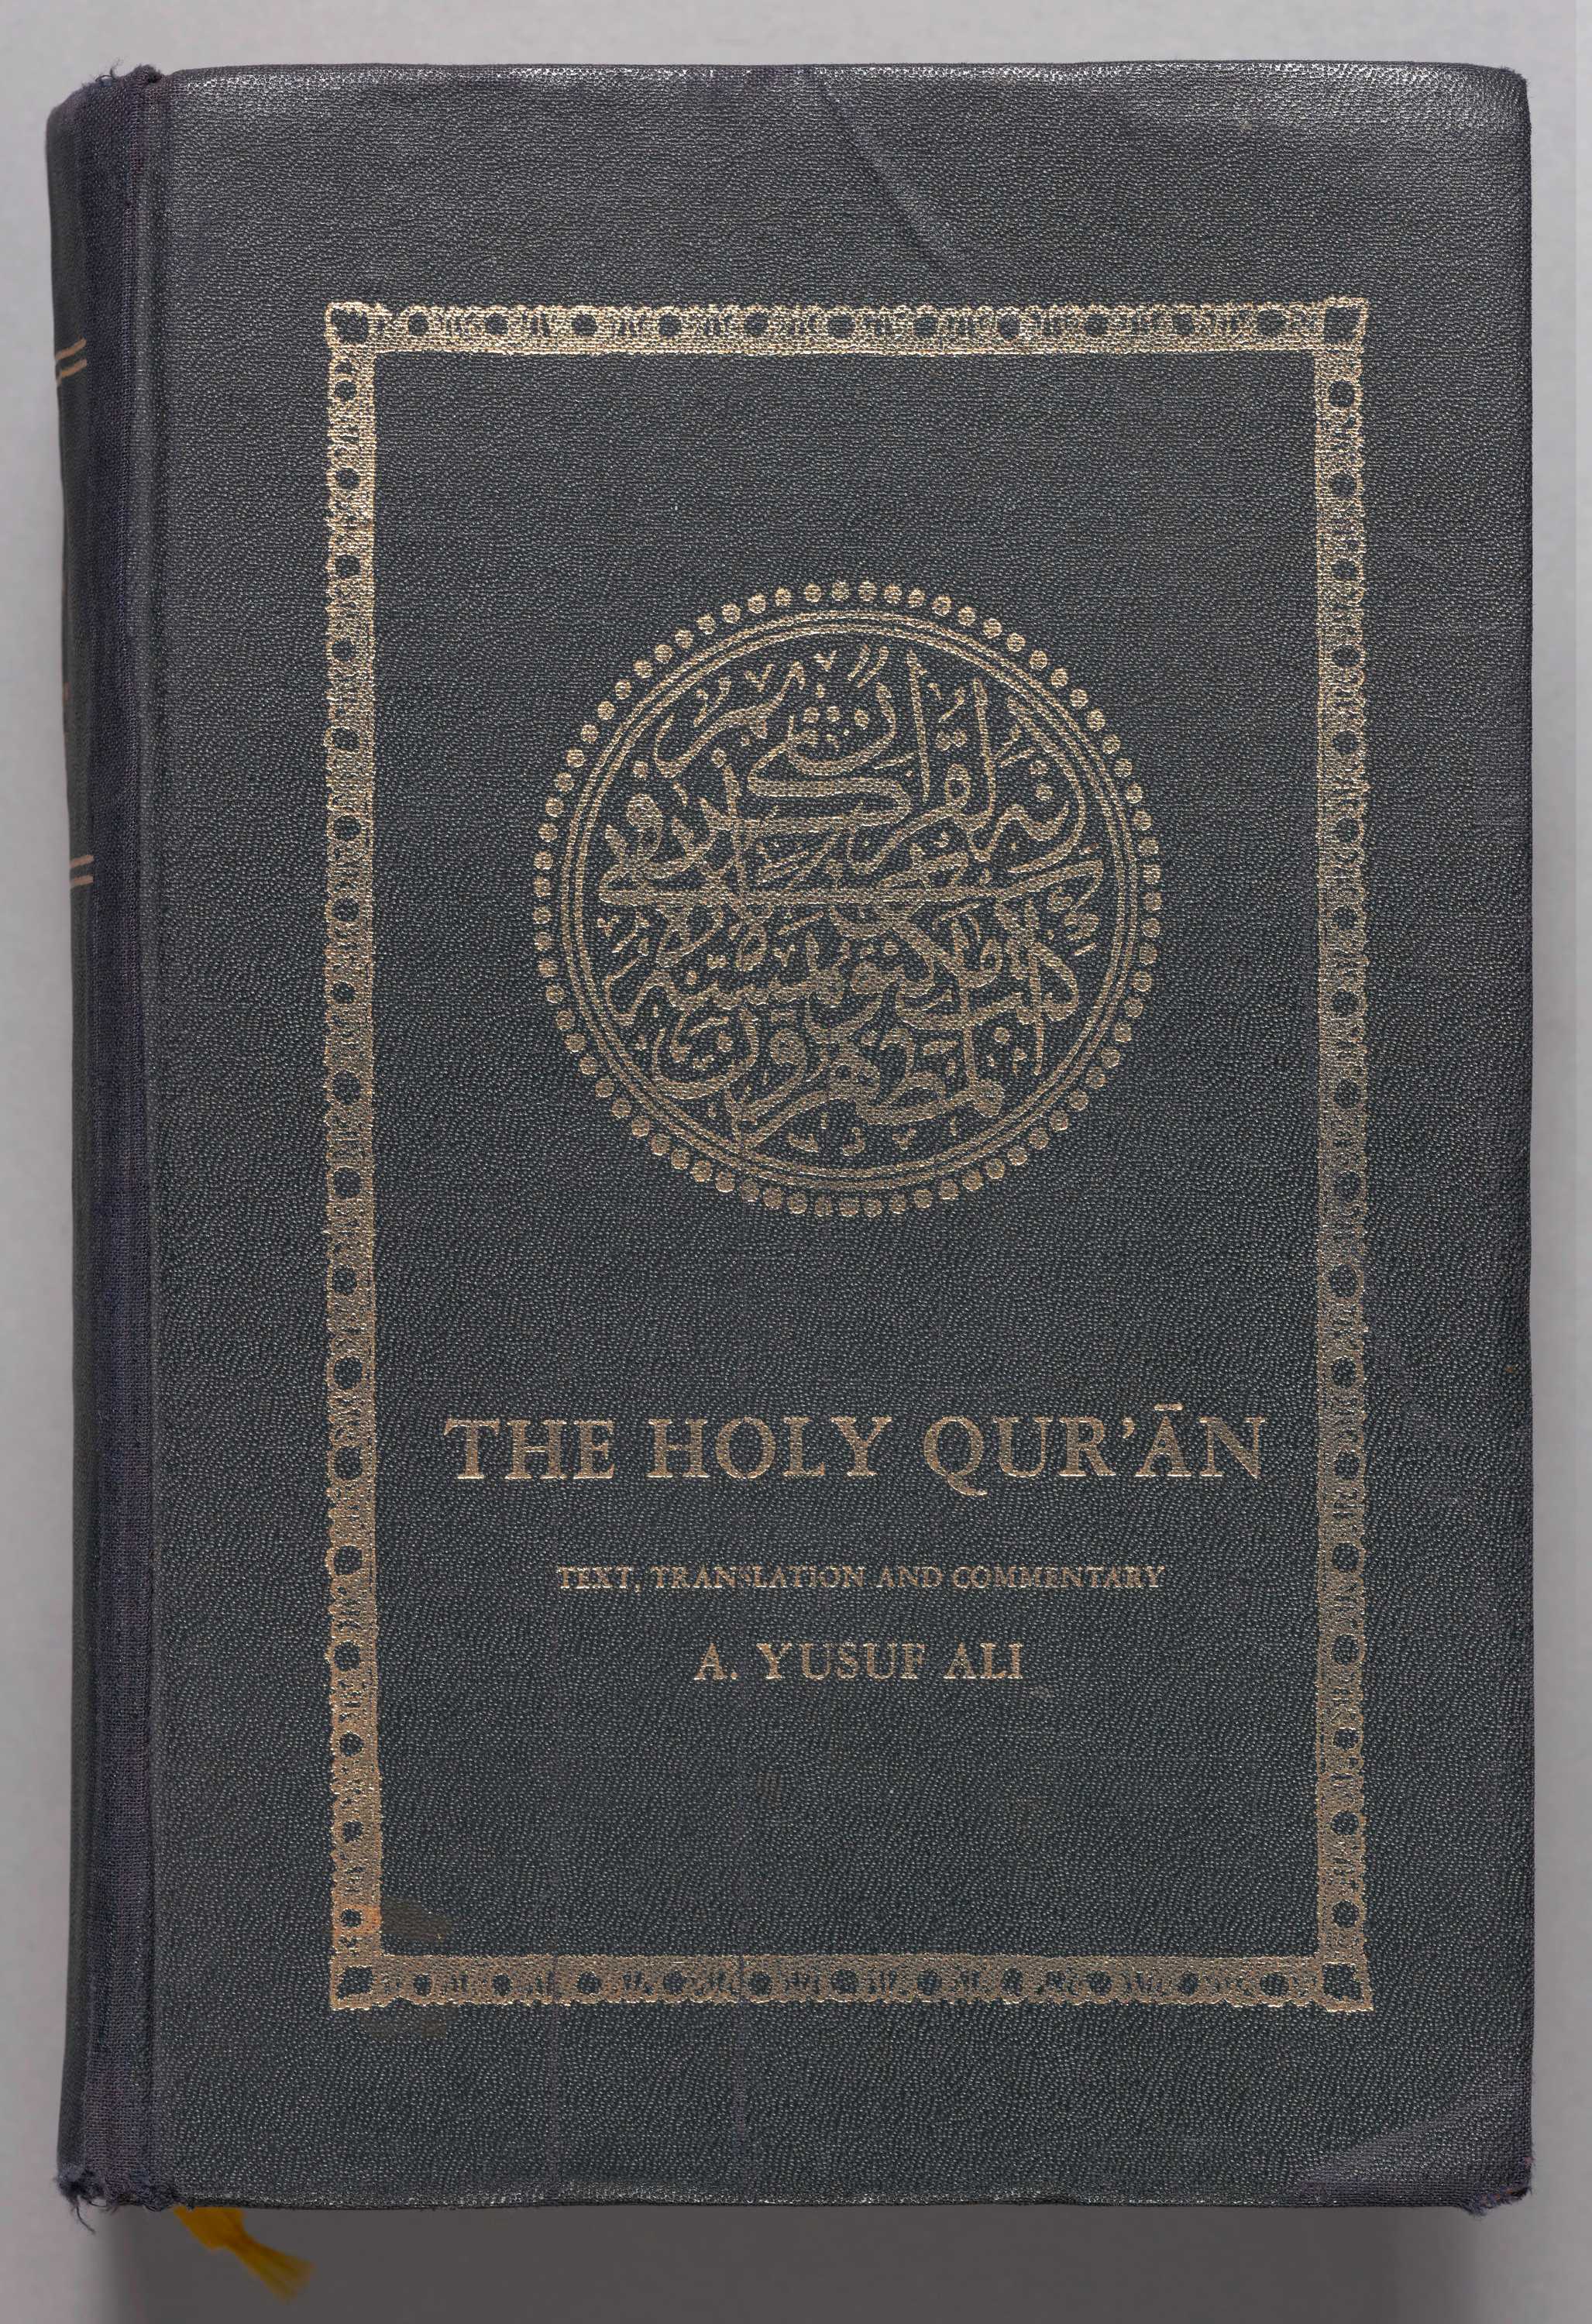 This Qur'an is a thick hard-backed book with a black cloth cover imprinted with gold inked letters and designs.